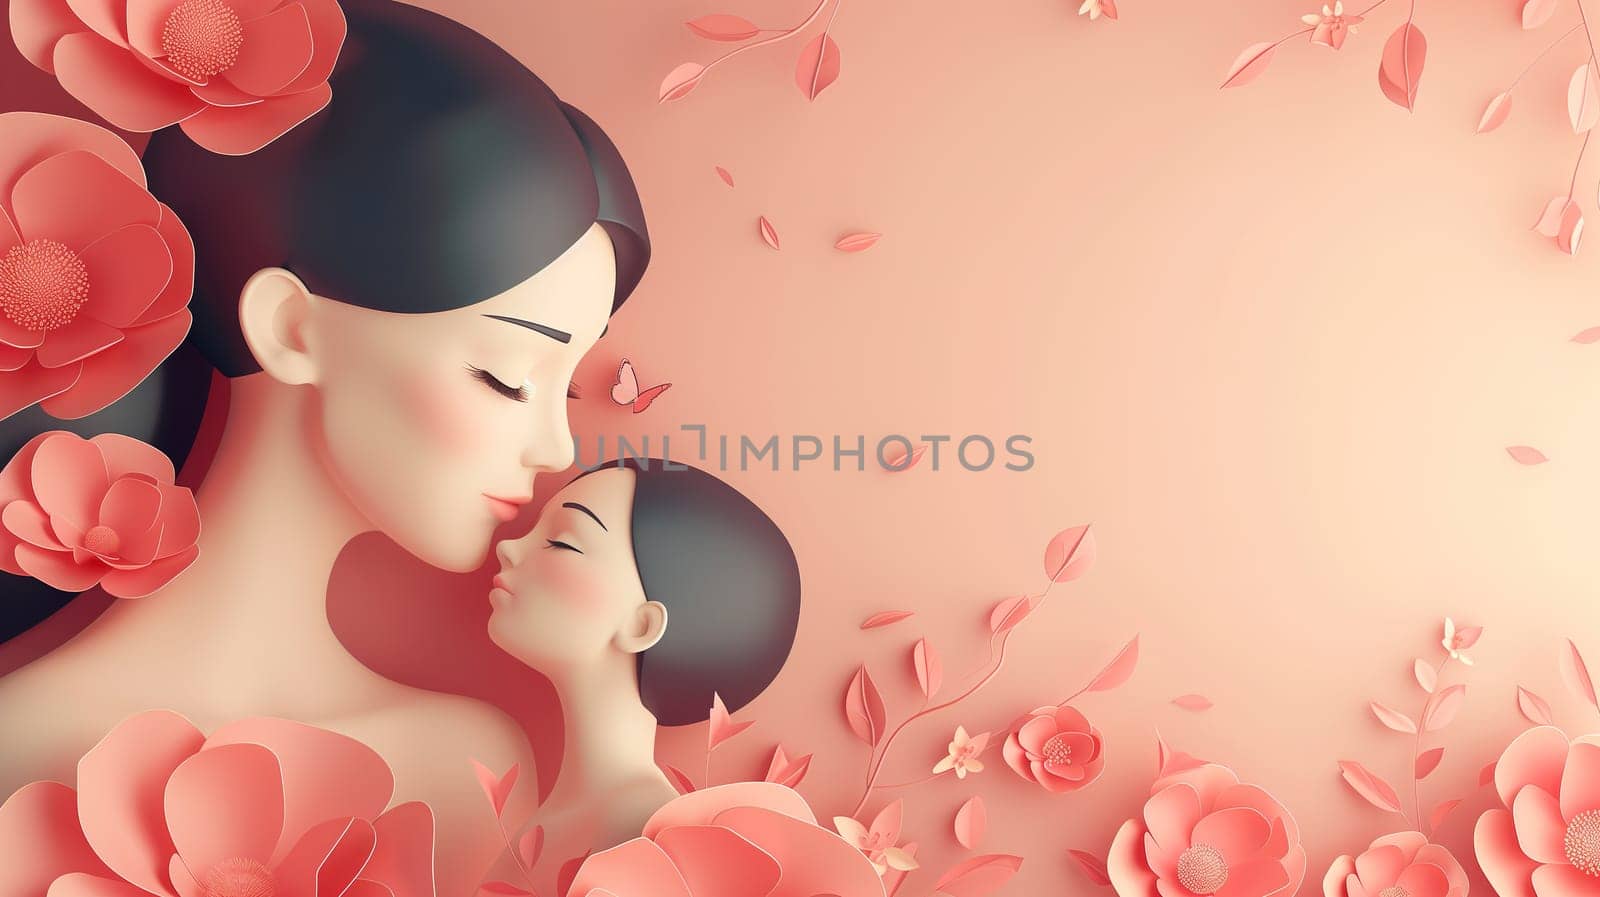 A woman is gently holding a child in her arms, both surrounded by a vibrant display of pink flowers. They are in a tender moment, connected by love and care in a natural setting.